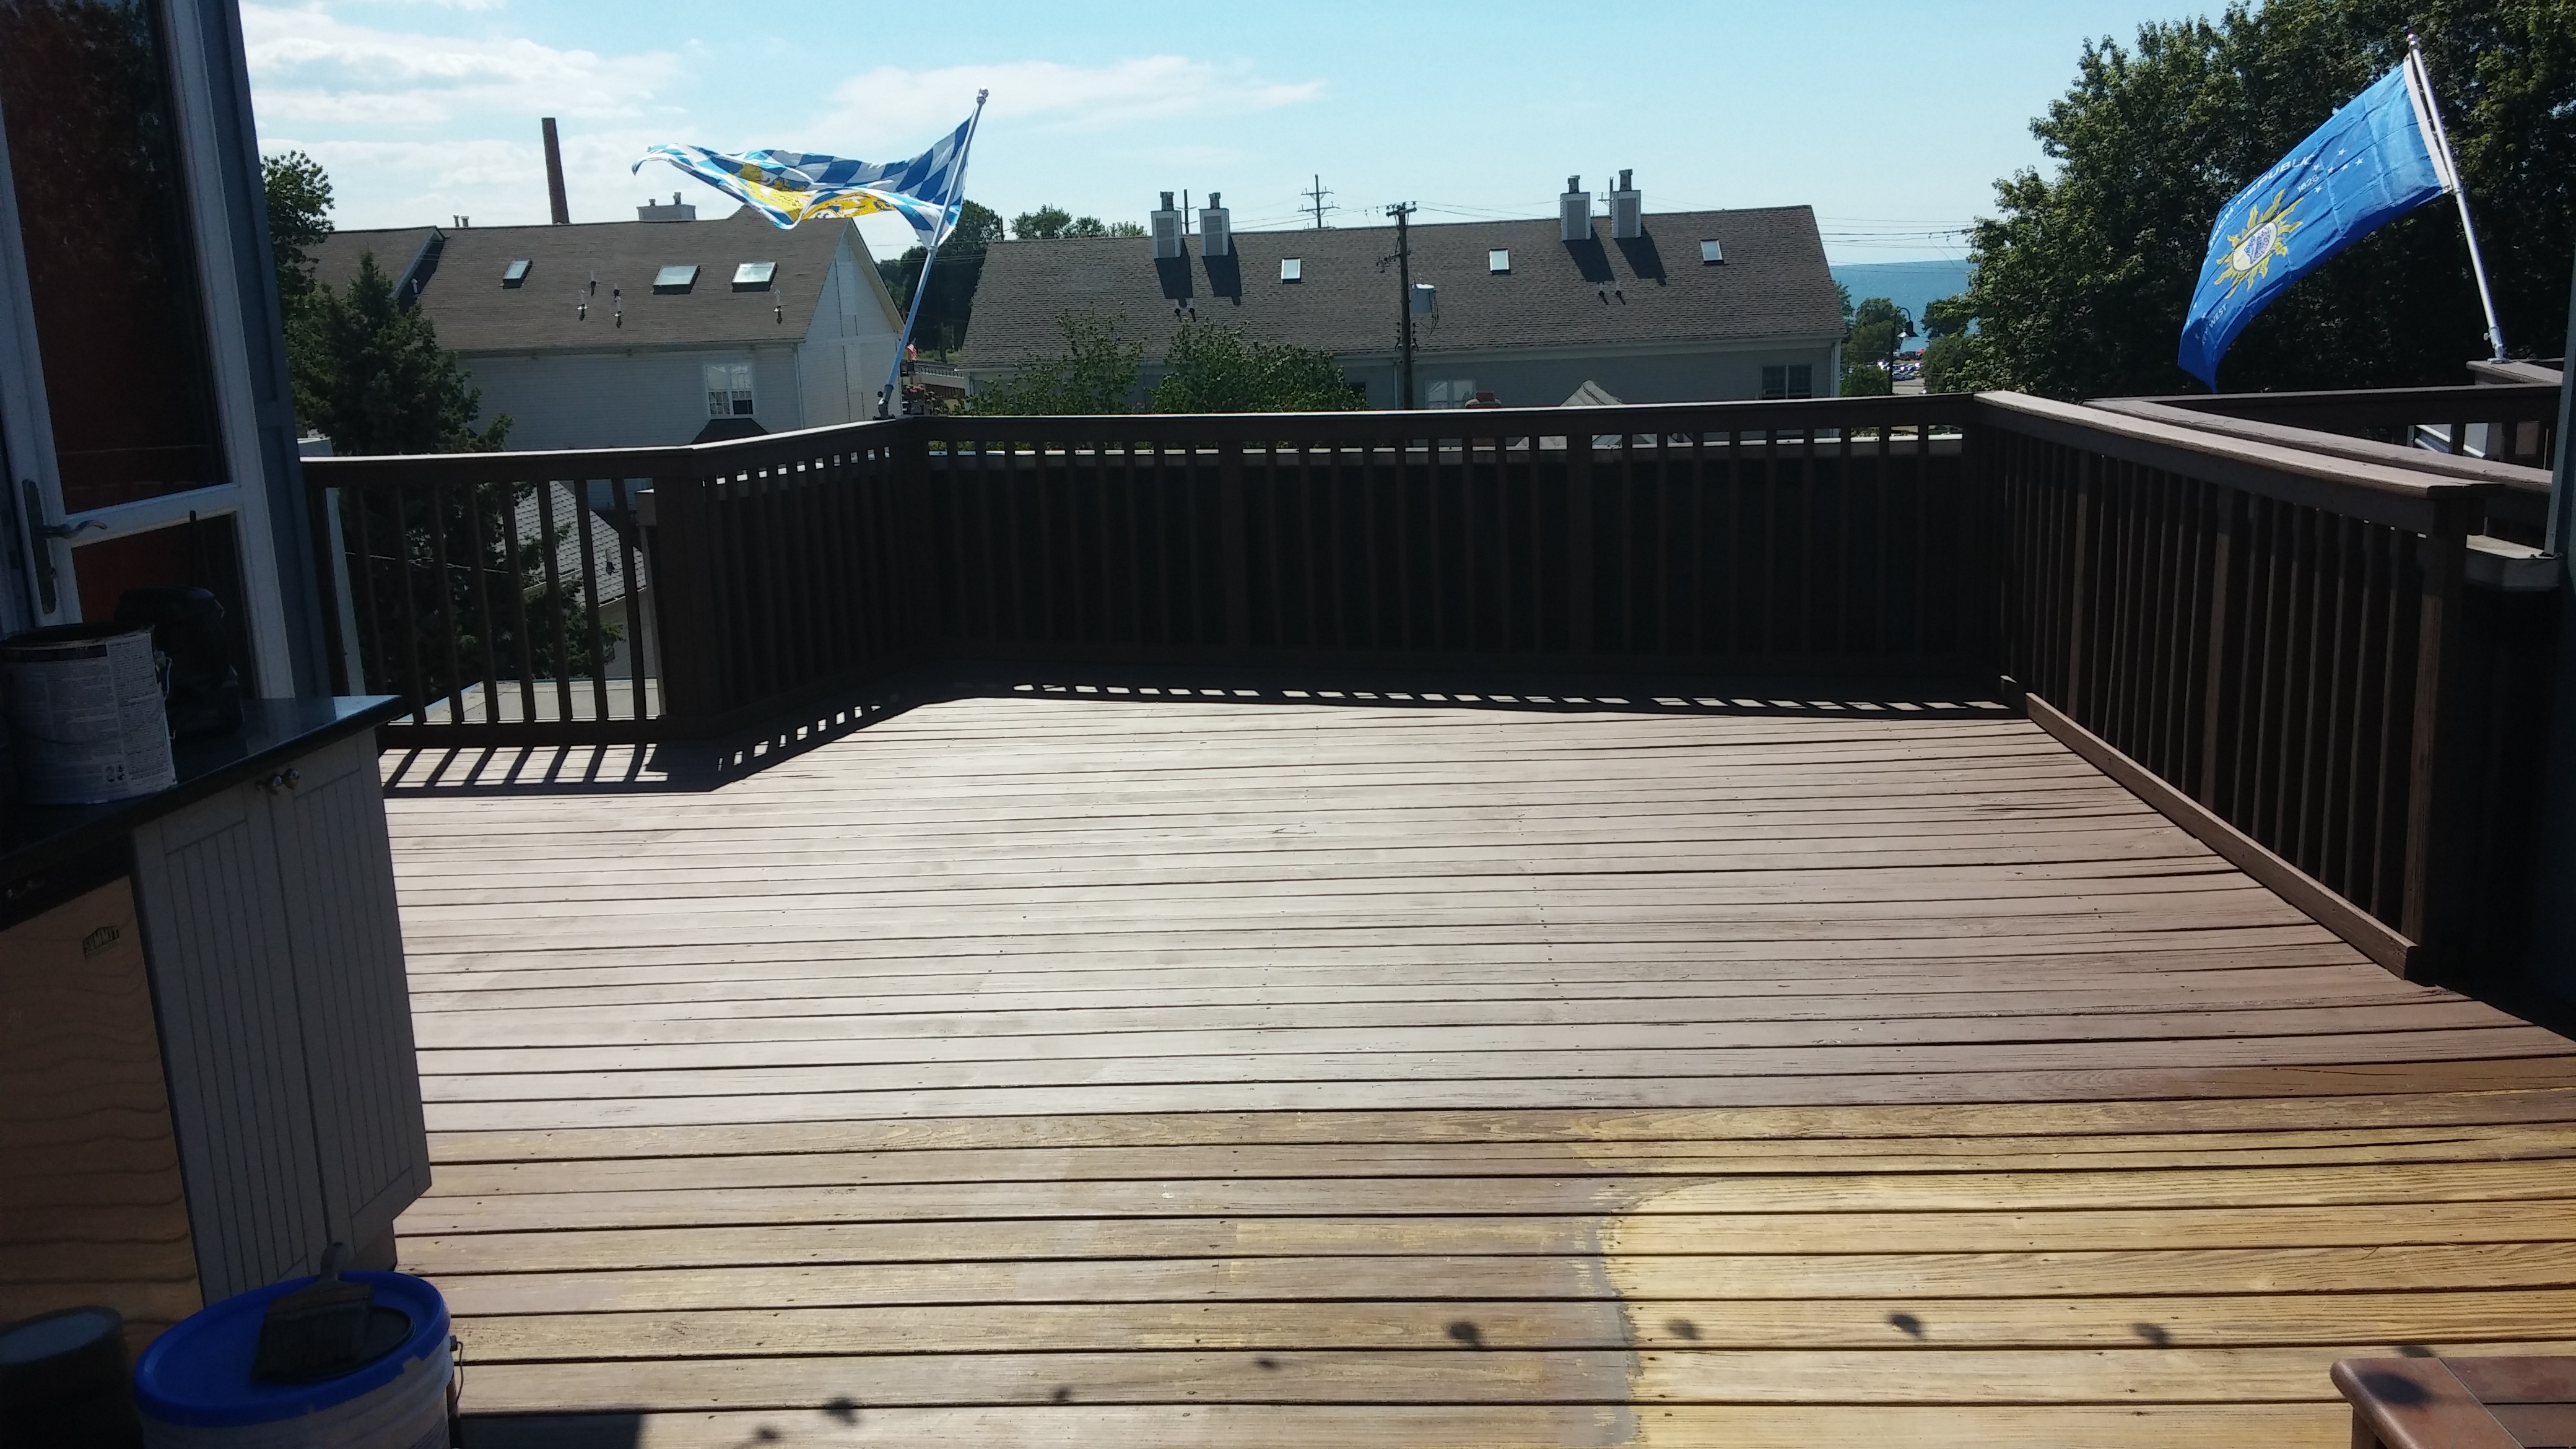 During - Comparison of the Deck Before and the Area Pressure Washed